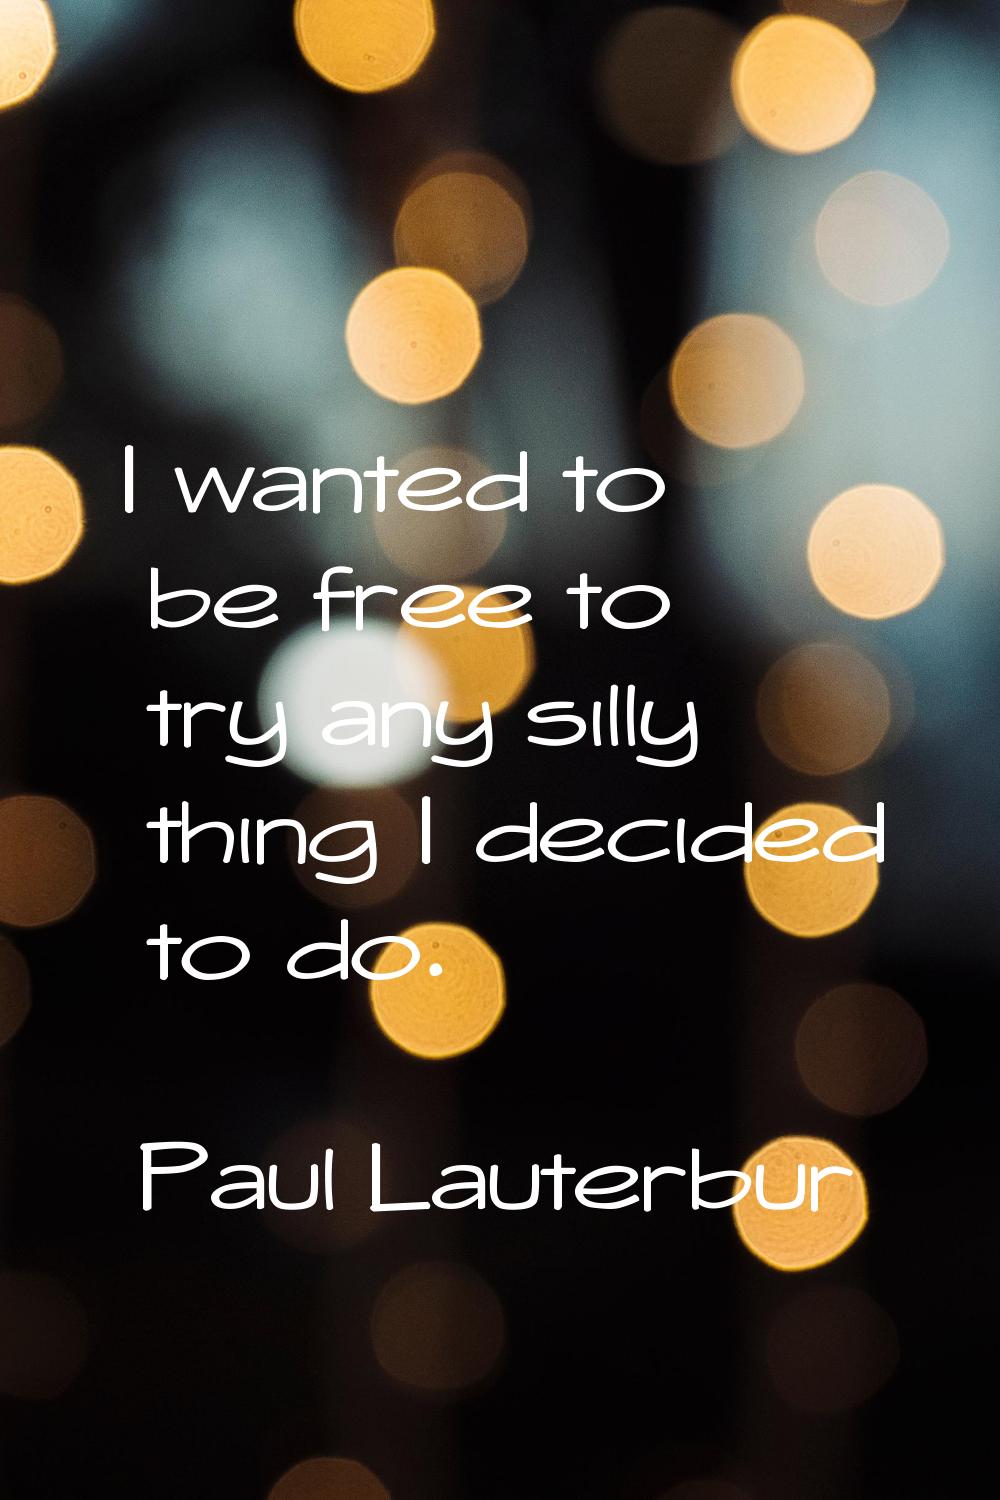 I wanted to be free to try any silly thing I decided to do.